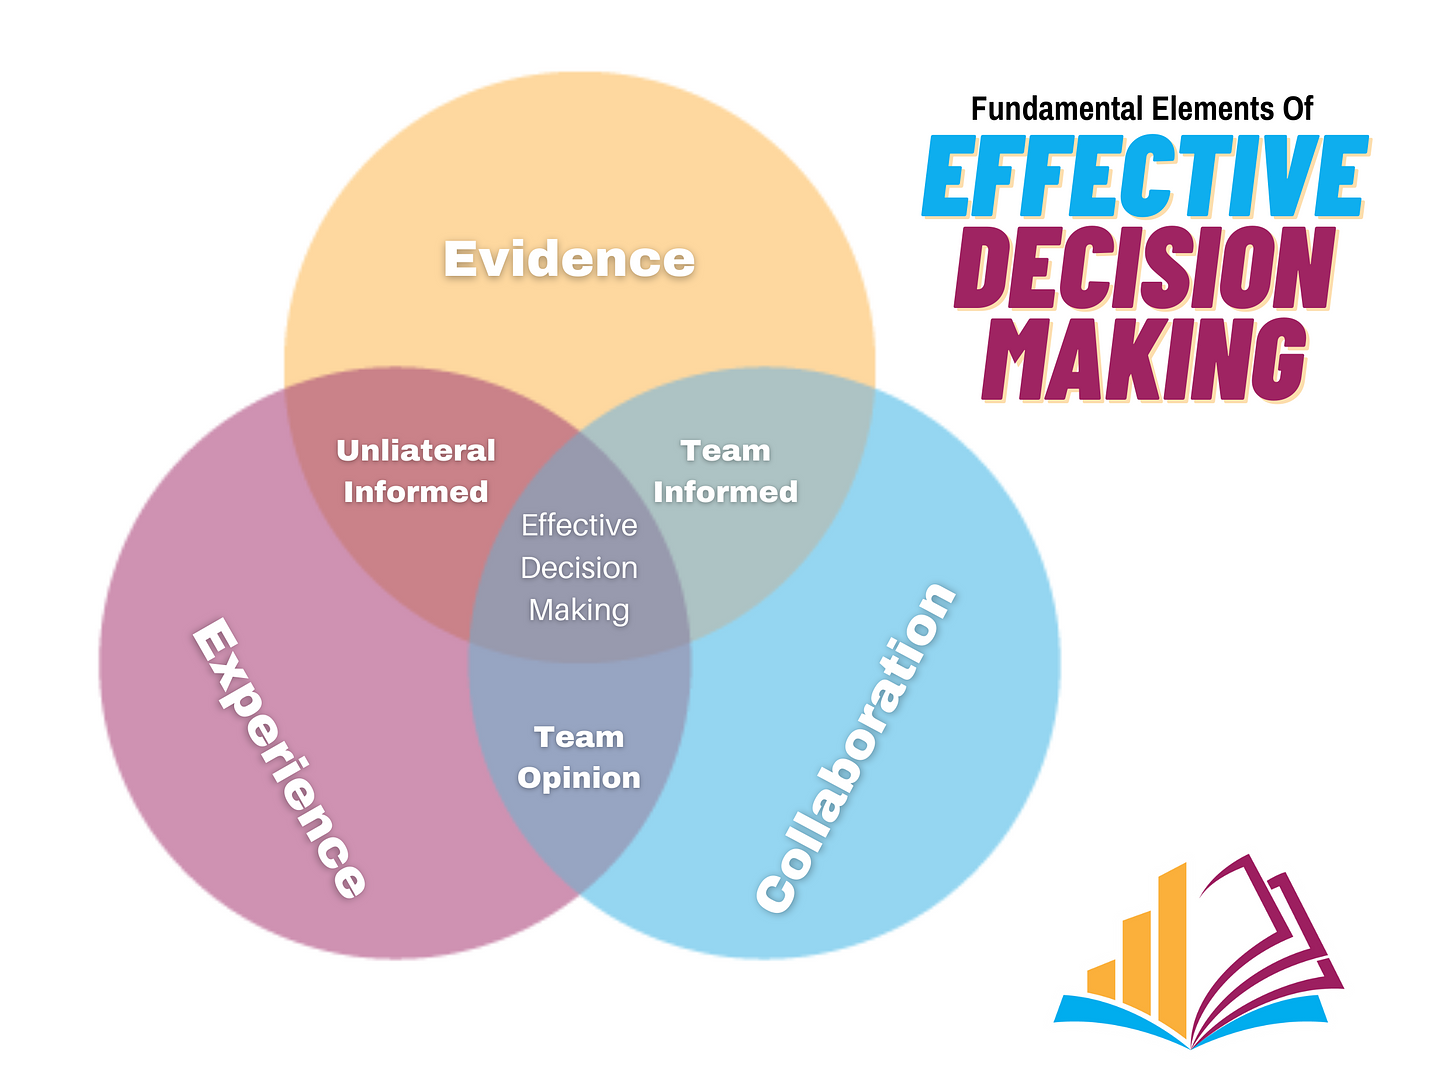 Fundamental elements of effective decision making - Evidence, Experience and Collaboration